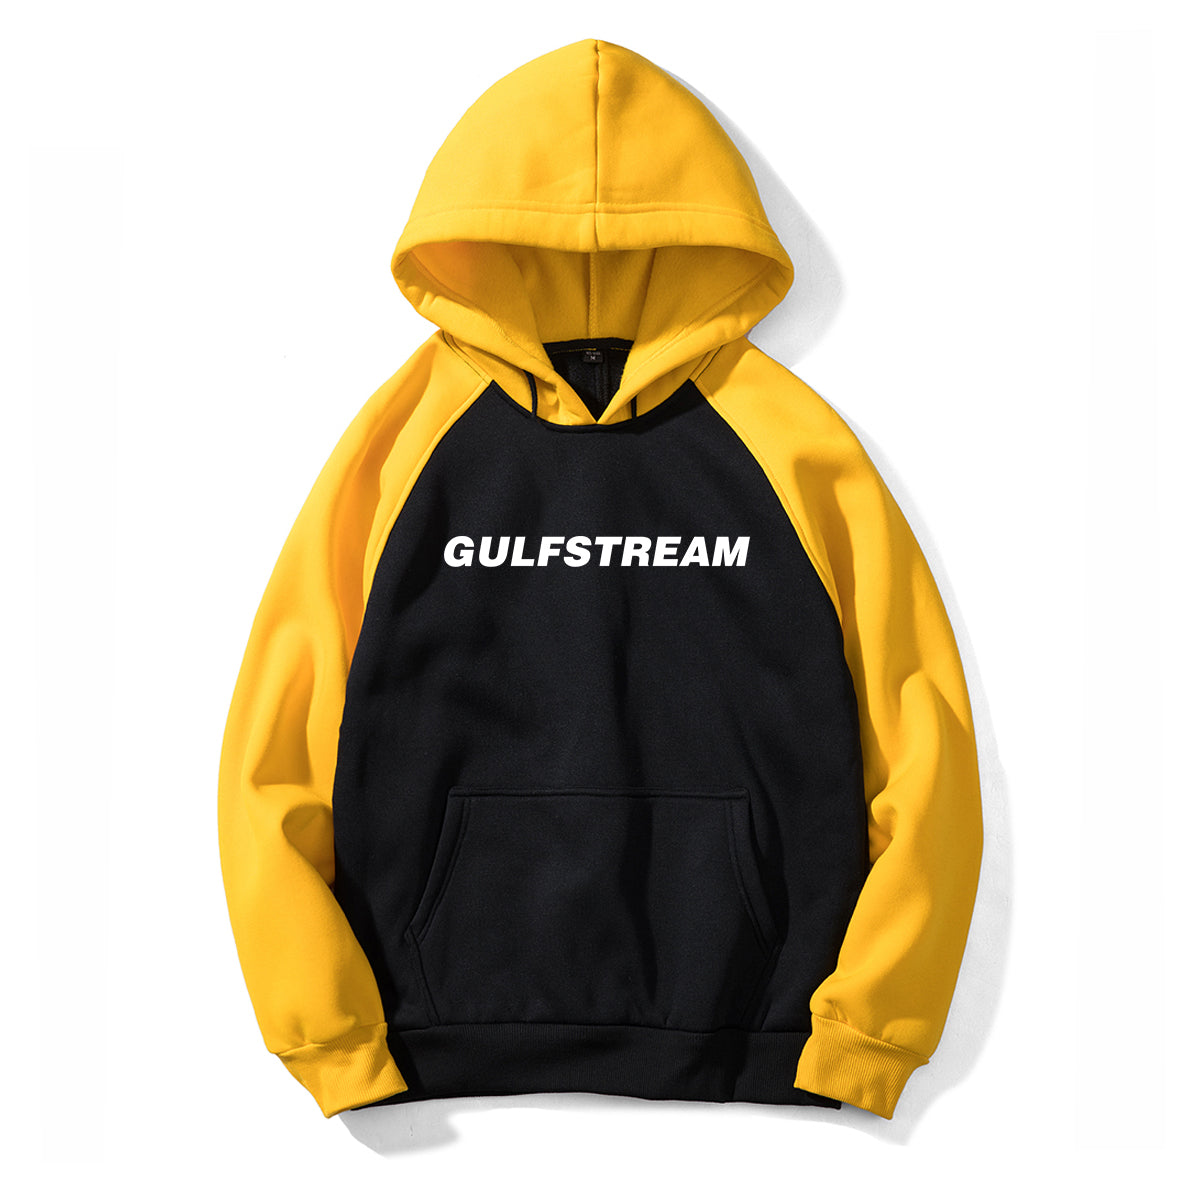 Gulfstream & Text Designed Colourful Hoodies